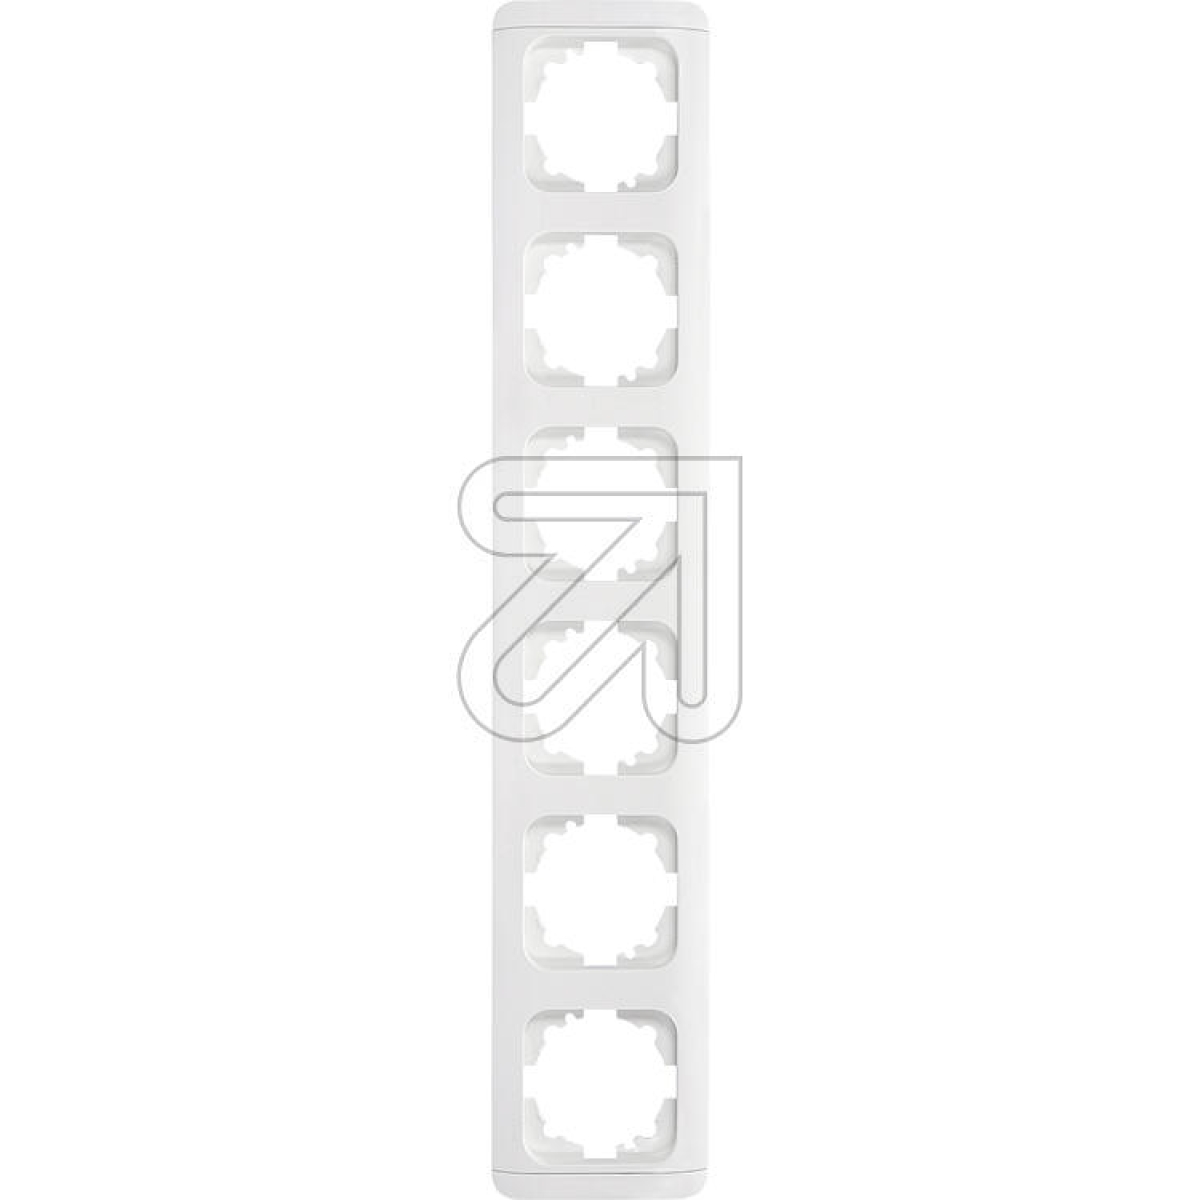 EGBElegant Standard 6x frame with clip pair, pure w. 91501926/92521906Article-No: 080225